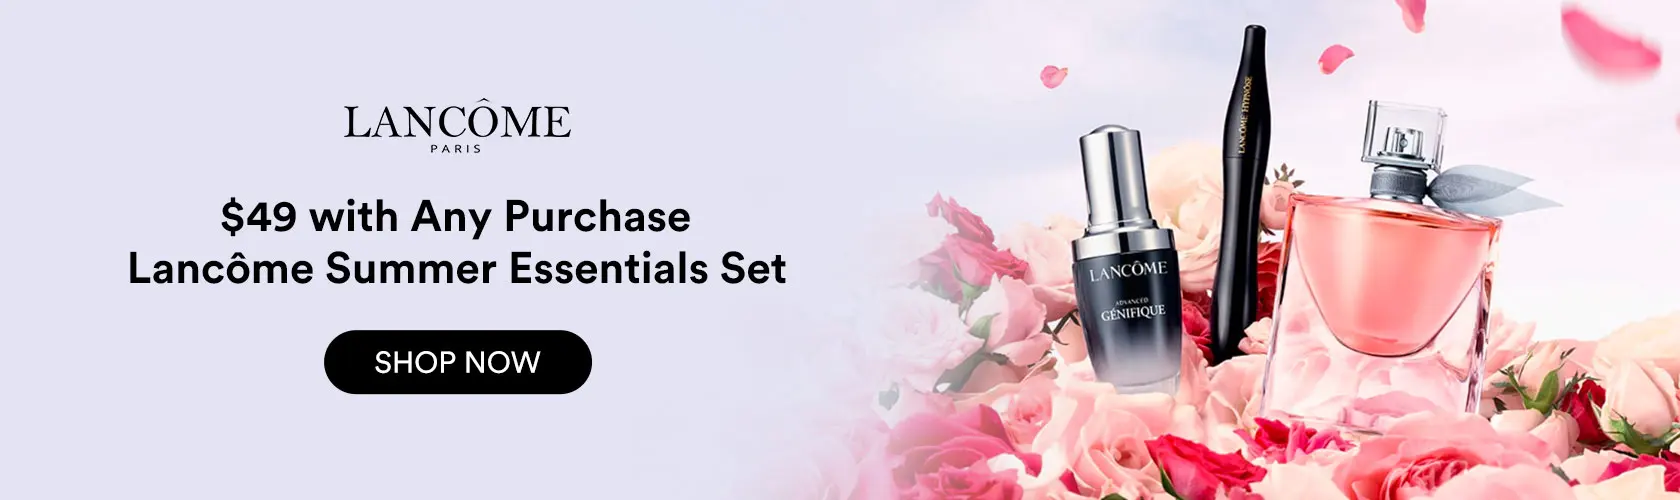 Lancome: $49 with Any Purchase Lancôme Summer Essentials Set